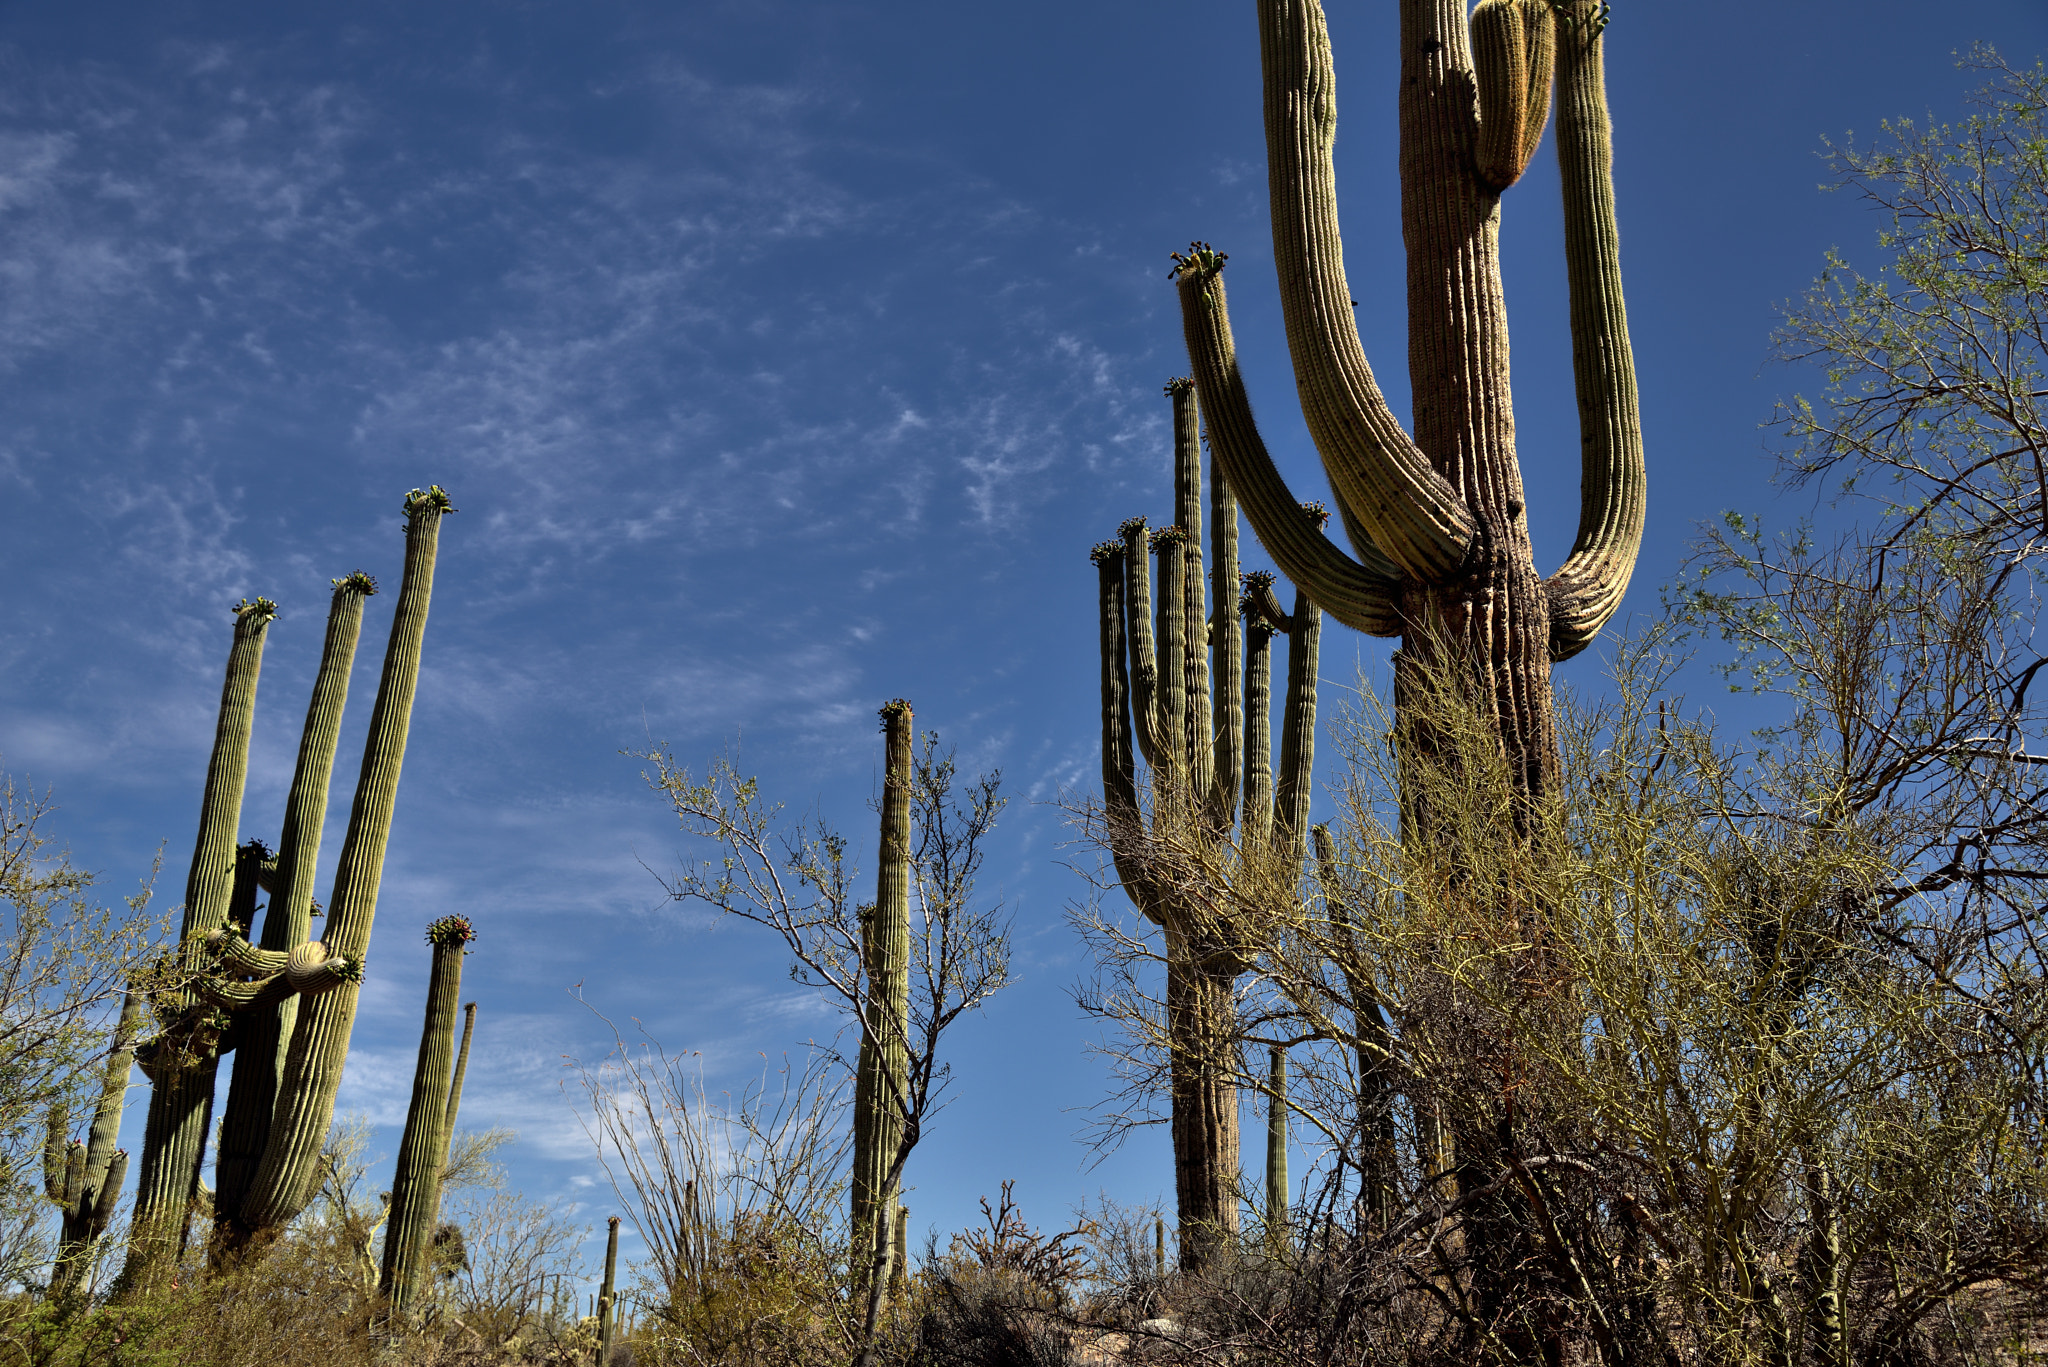 Nikon D800E + Nikon AF-S Nikkor 24-120mm F4G ED VR sample photo. Looking up to skies above with nearby saguaro cactus photography